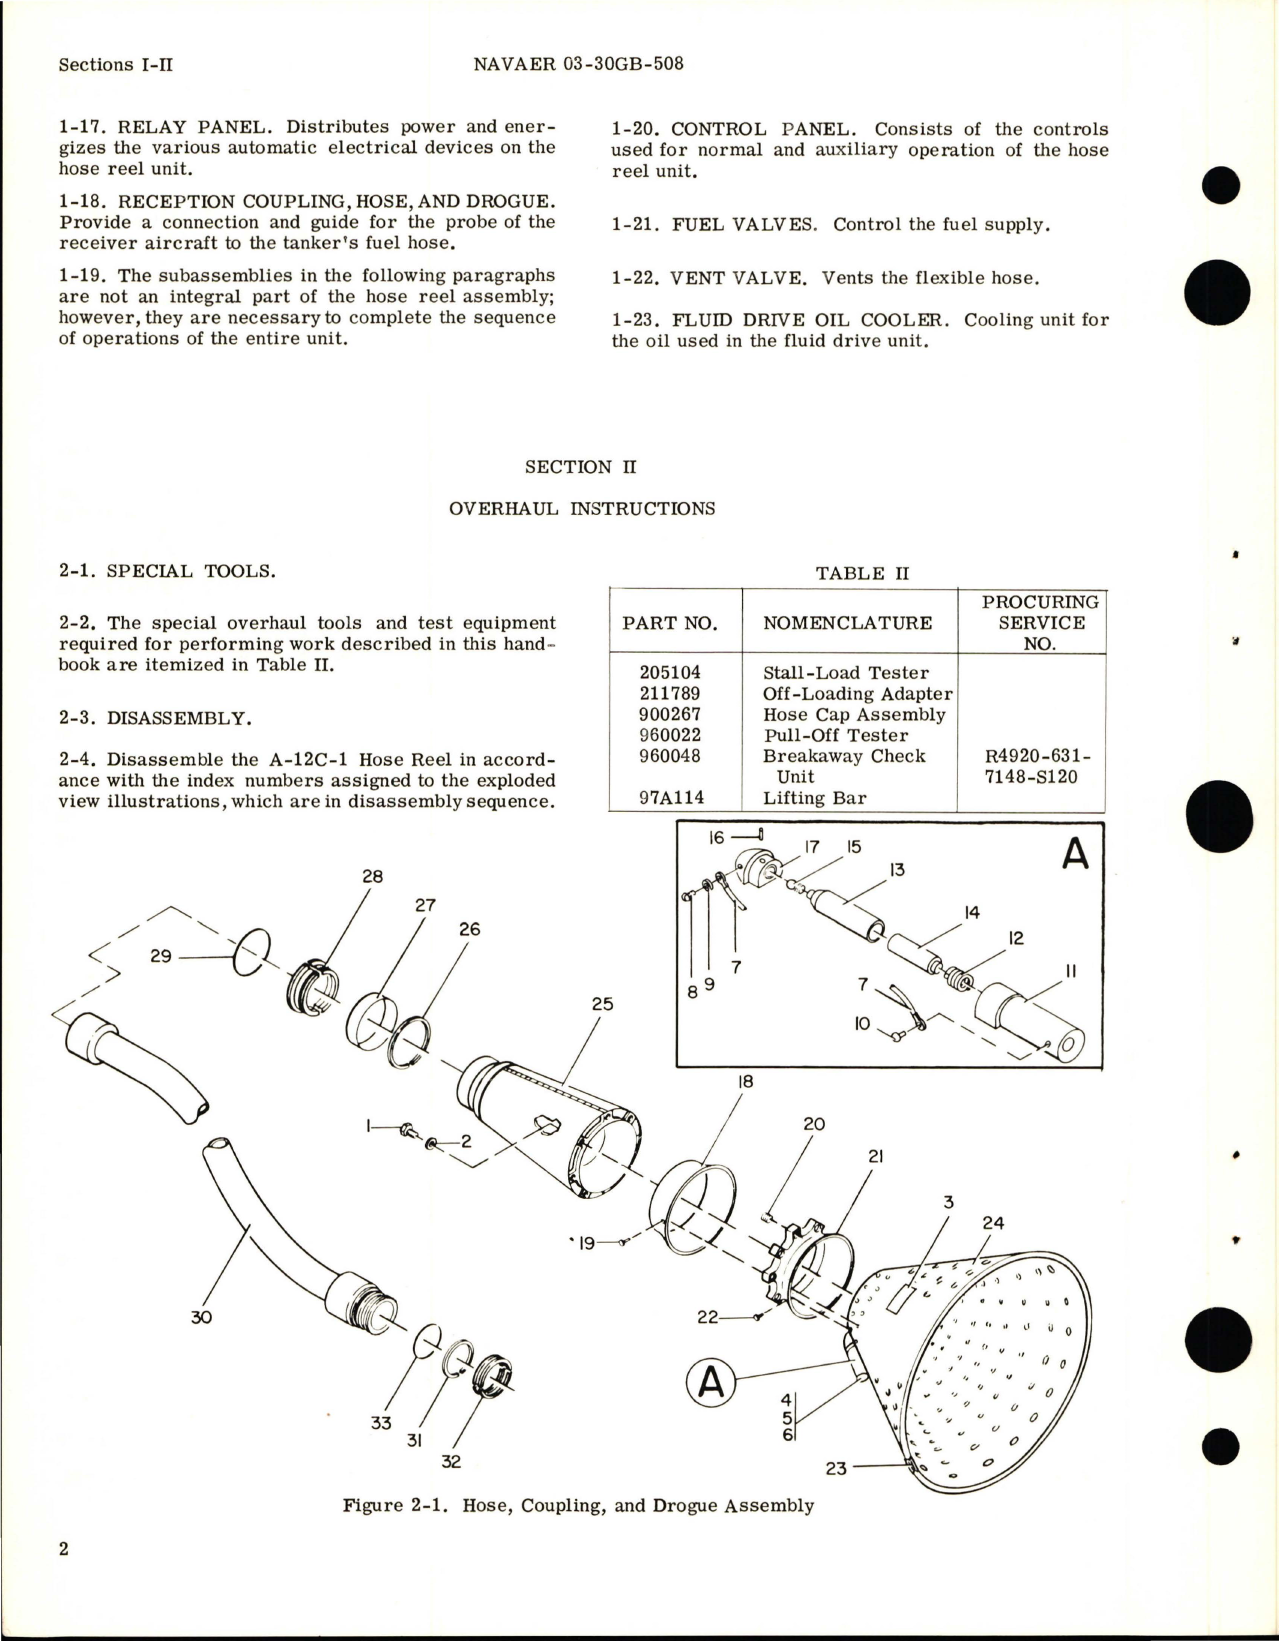 Sample page 6 from AirCorps Library document: Overhaul Instructions for Automatic Hose Reel Assemblies - Models A-12C, A-12A-2, and A-12C-1 